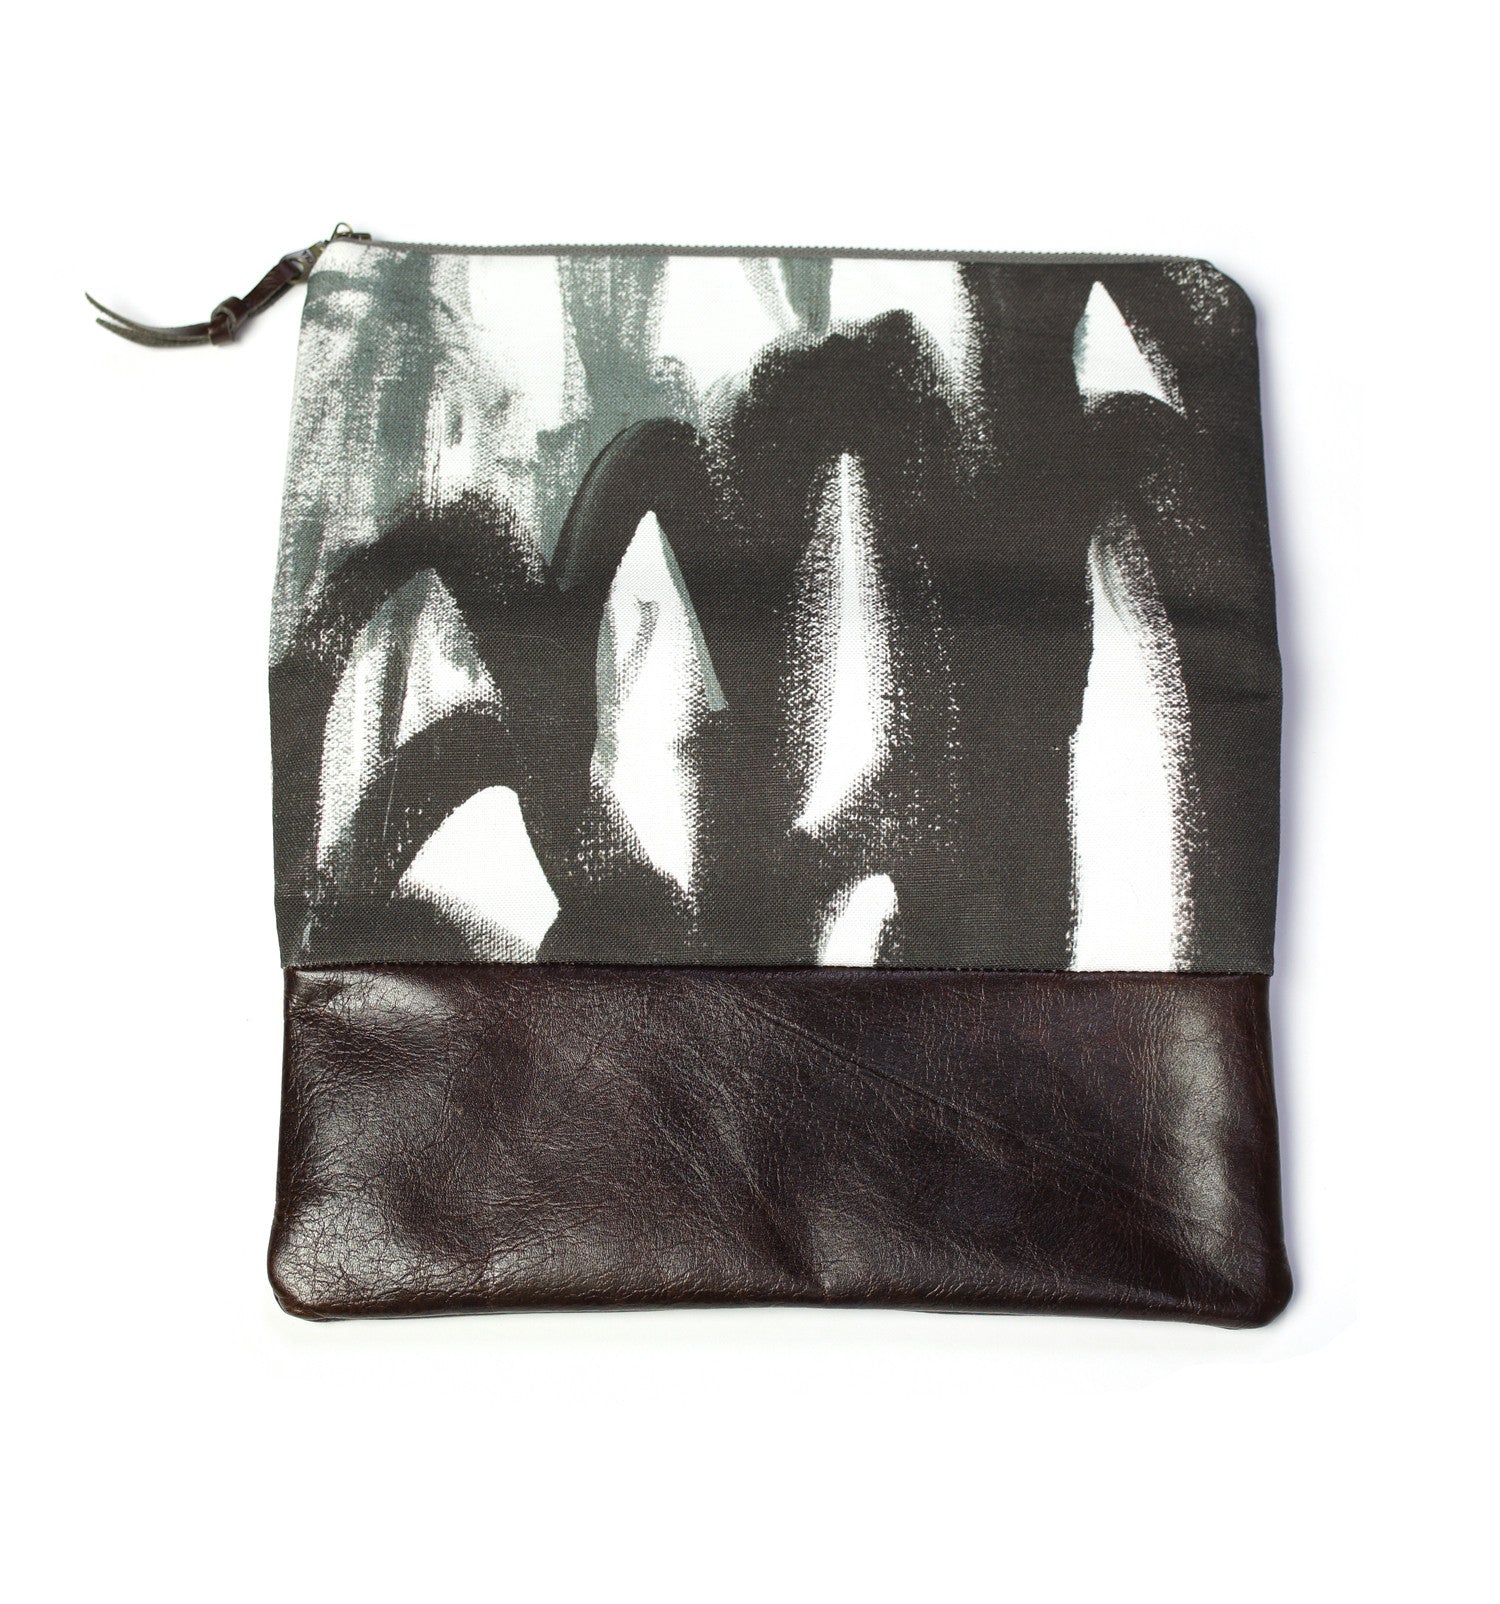 Magpie foldover clutch